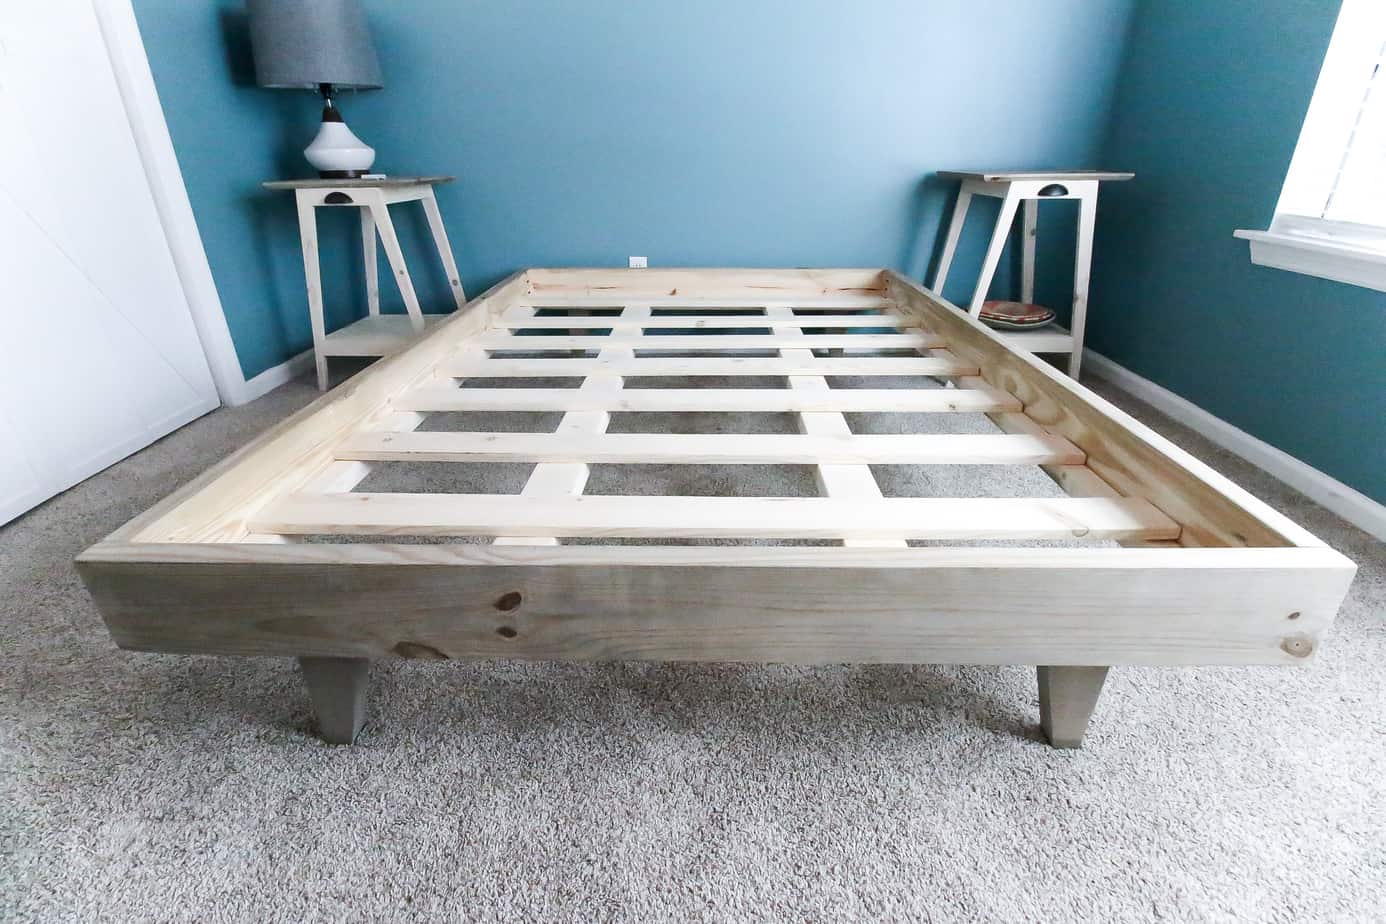 How To Build A Platform Bed For 50, Free King Size Bed Frame Plans With Storage